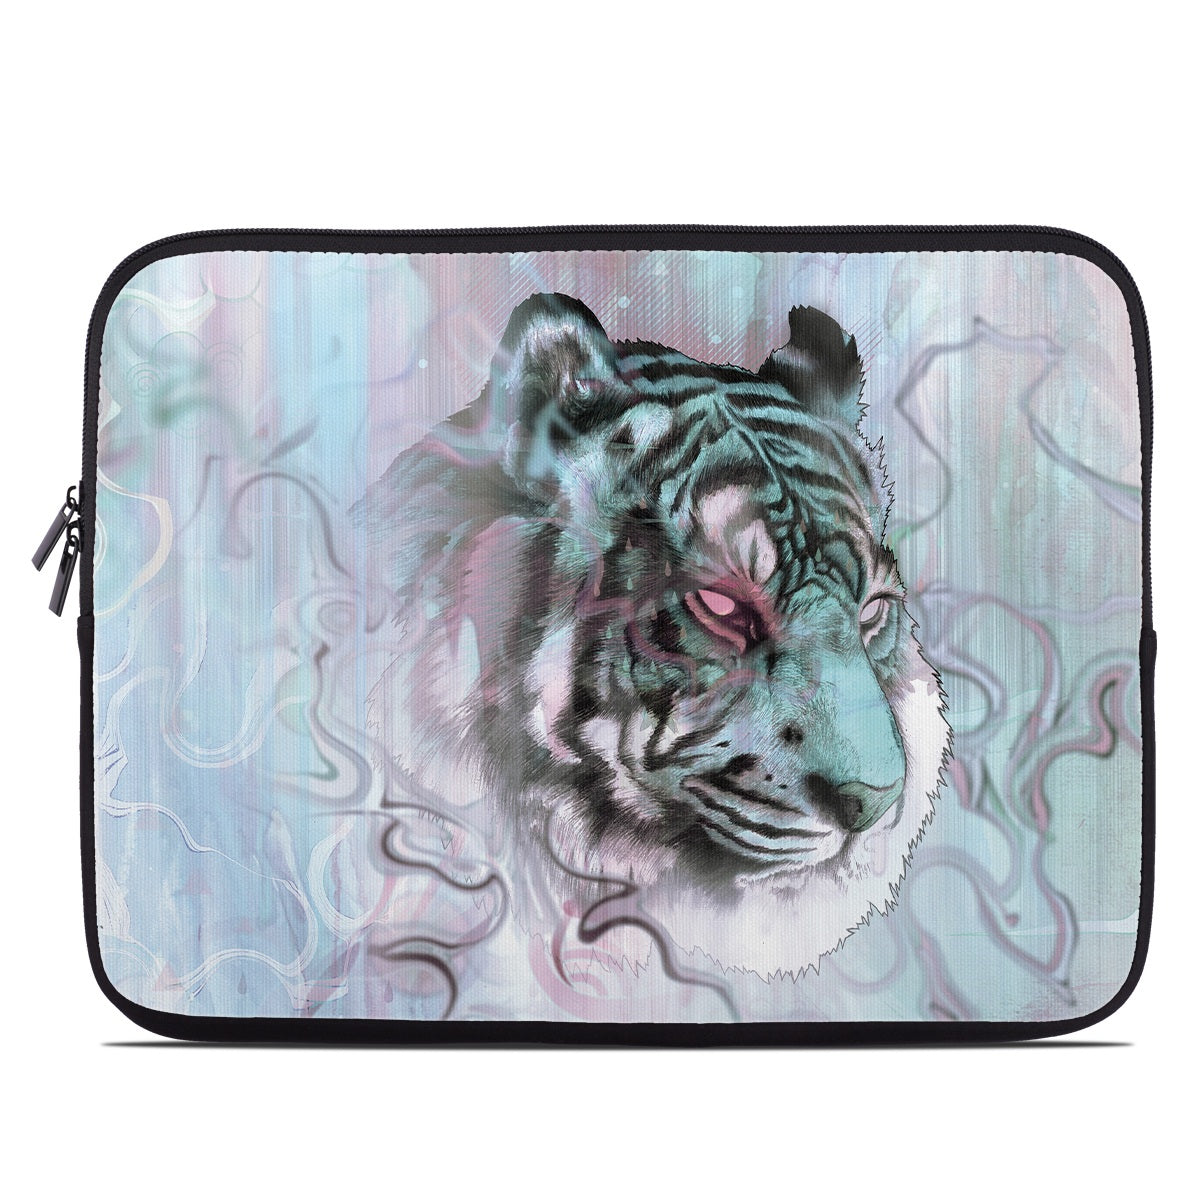 Illusive by Nature - Laptop Sleeve